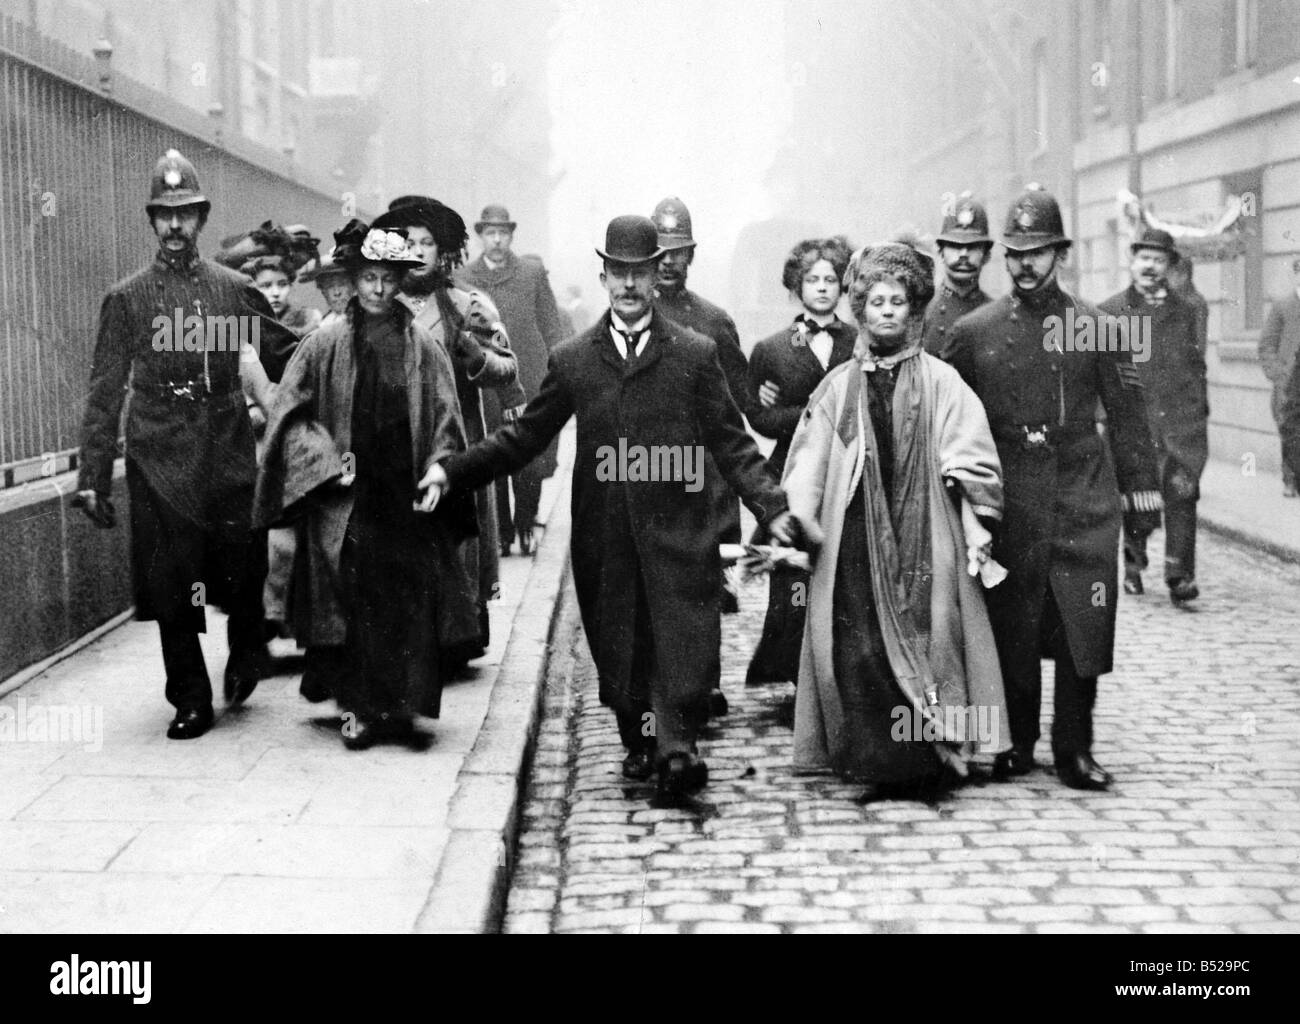 Mrs Emmeline Pankhurst Under Arrest circ 1910 being escorted by Police Officers Suffragettes Womens Rights Movement 1910s Stock Photo